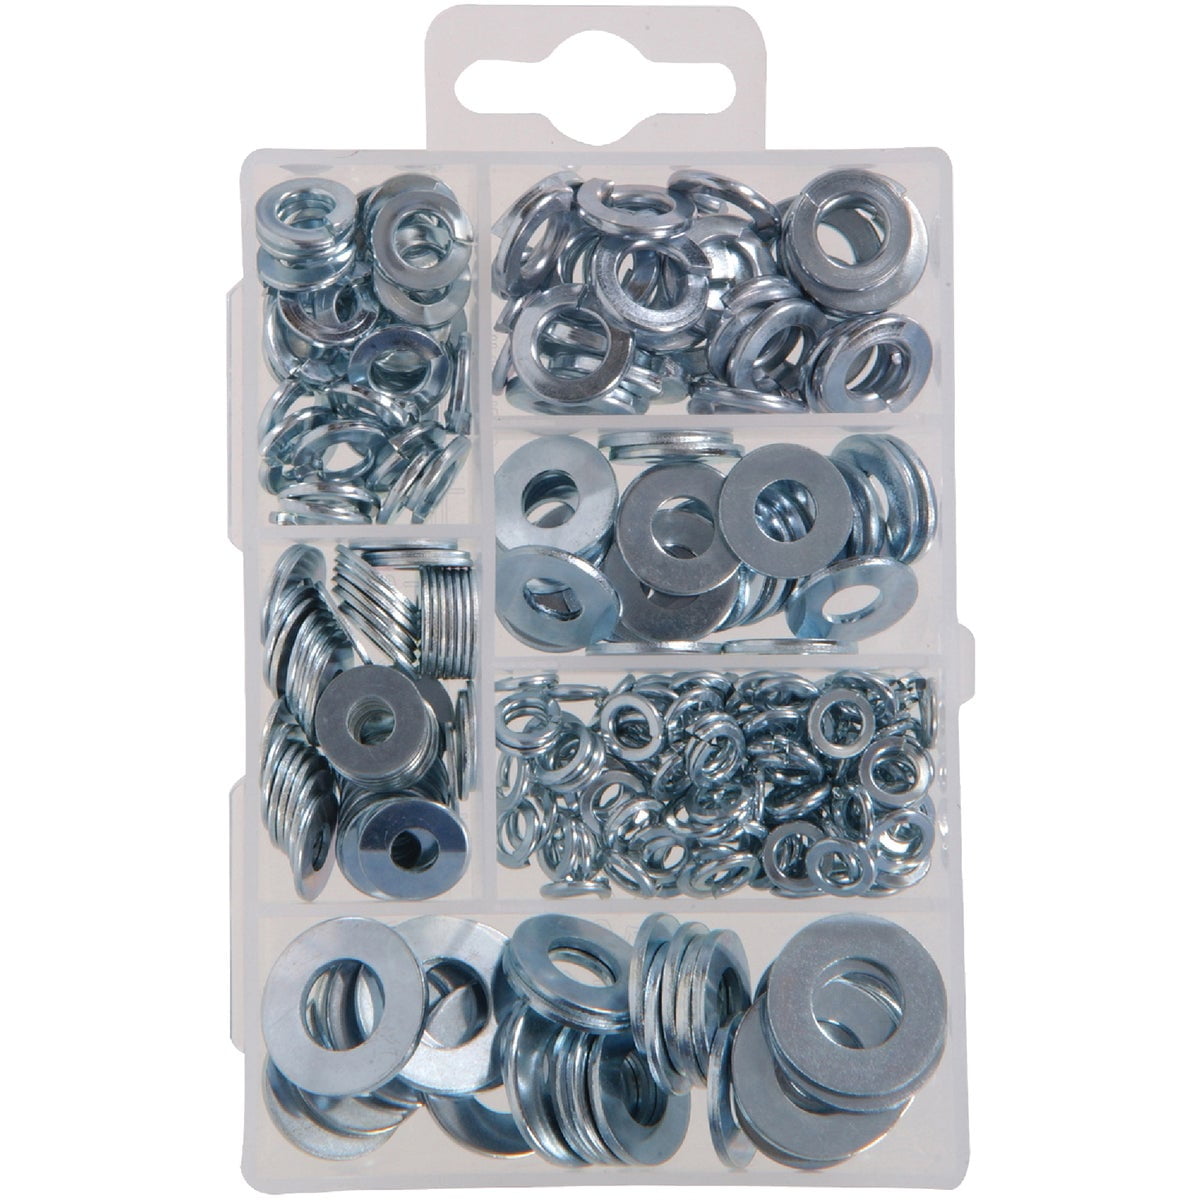 Unfinished 1/8 IP Steel Lock Nuts & Internal Tooth Lock Washers Lot of 100 ea 